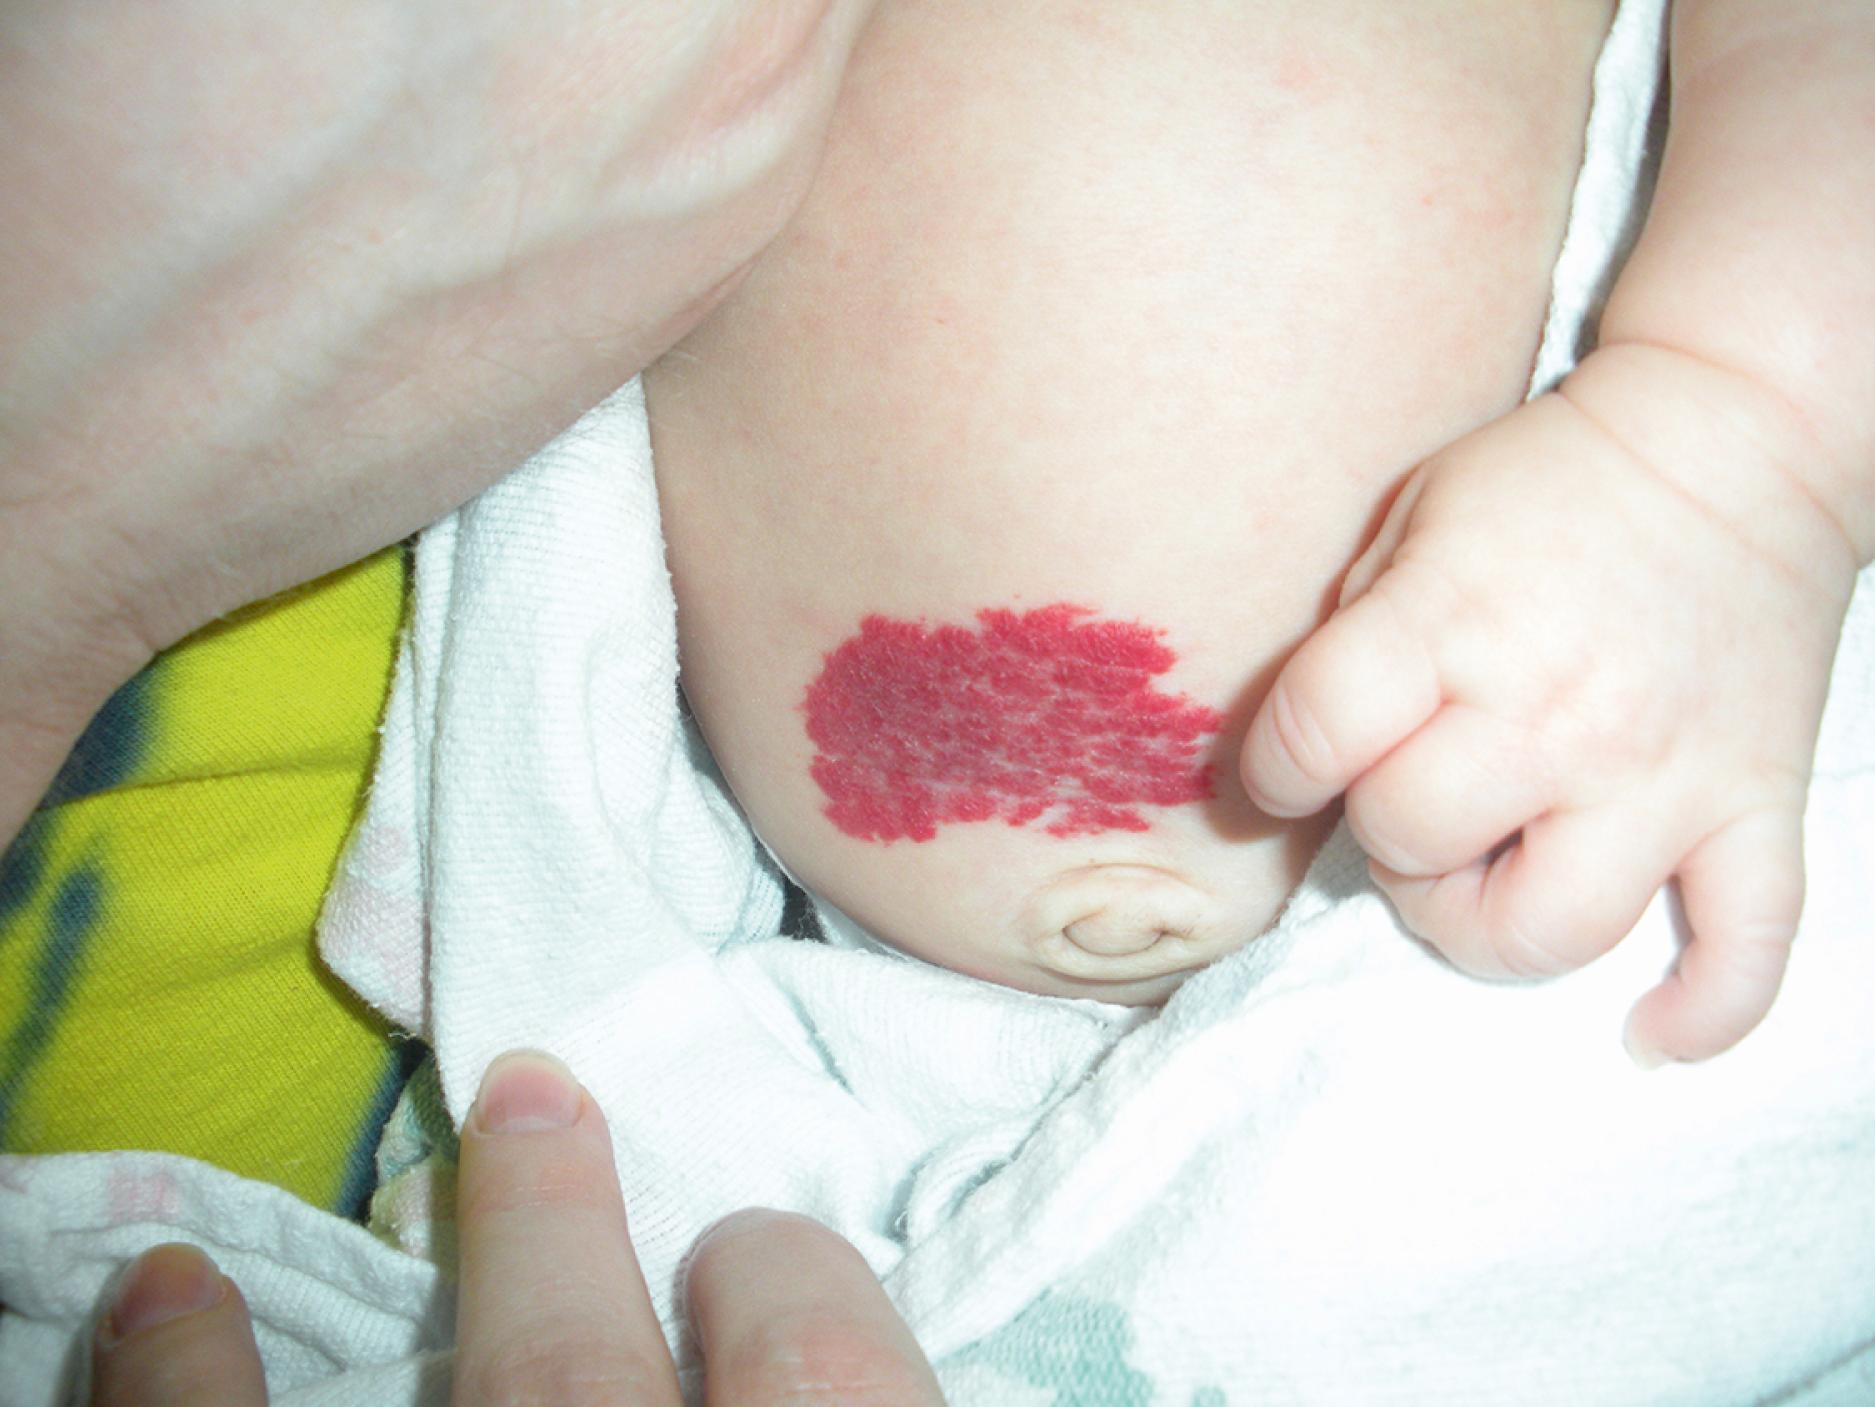 Fig. 10.3, Superficial hemangioma. This hemangioma is a confluent red plaque with the appearance that it can be pulled off the surface of the skin.